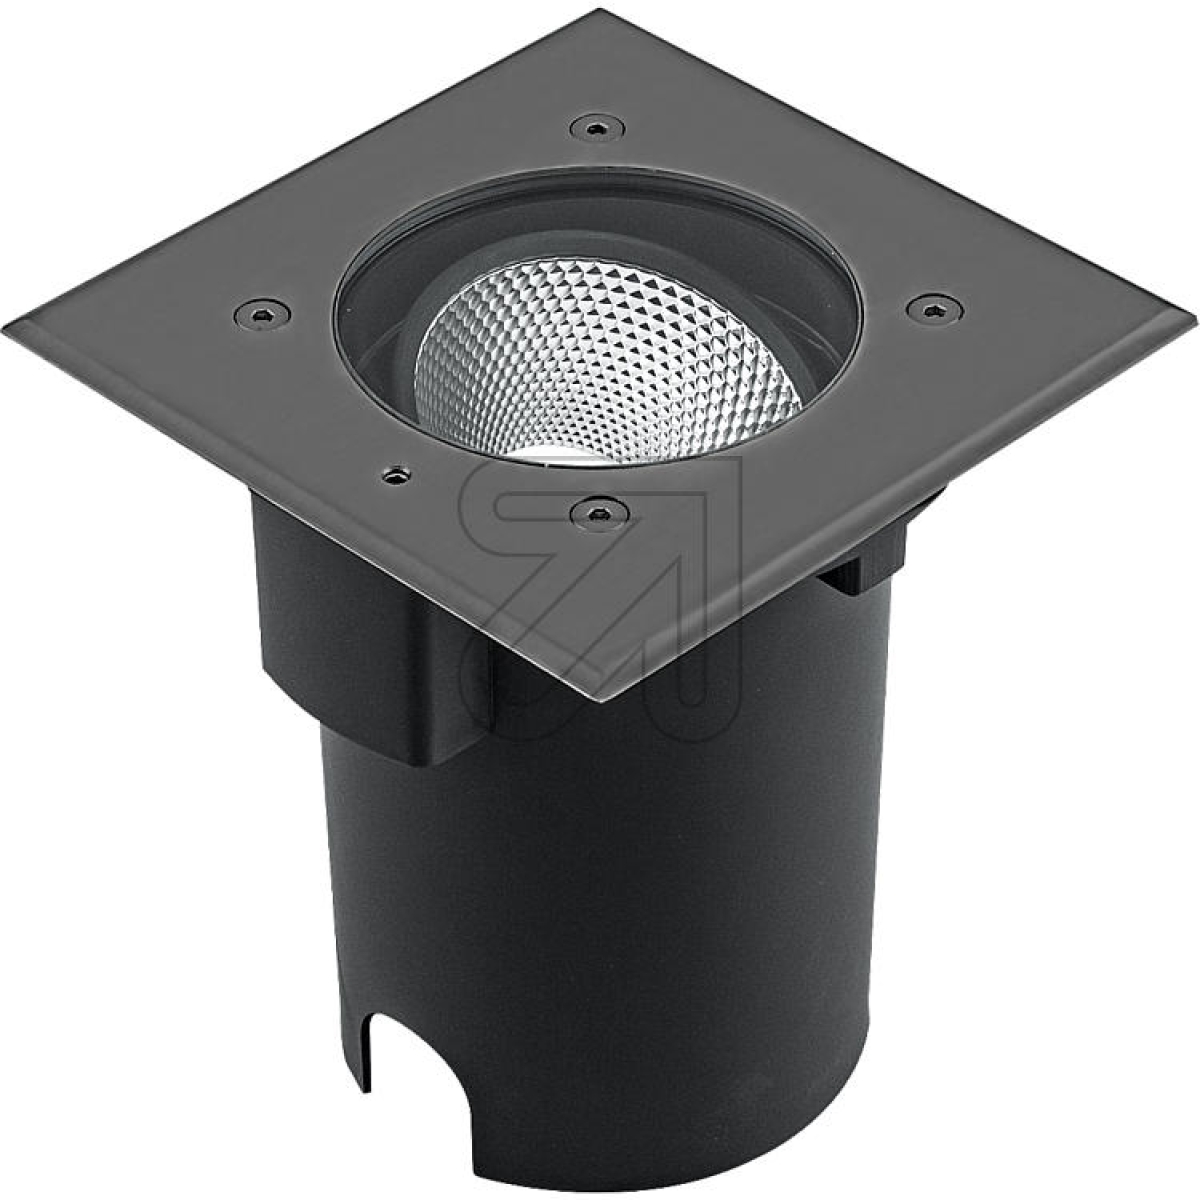 EVNLED recessed floor spotlight IP67, 15W 3000K, square. 230V, beam angle 38°, stainless steel/aluminium, PC674101502Article-No: 683760